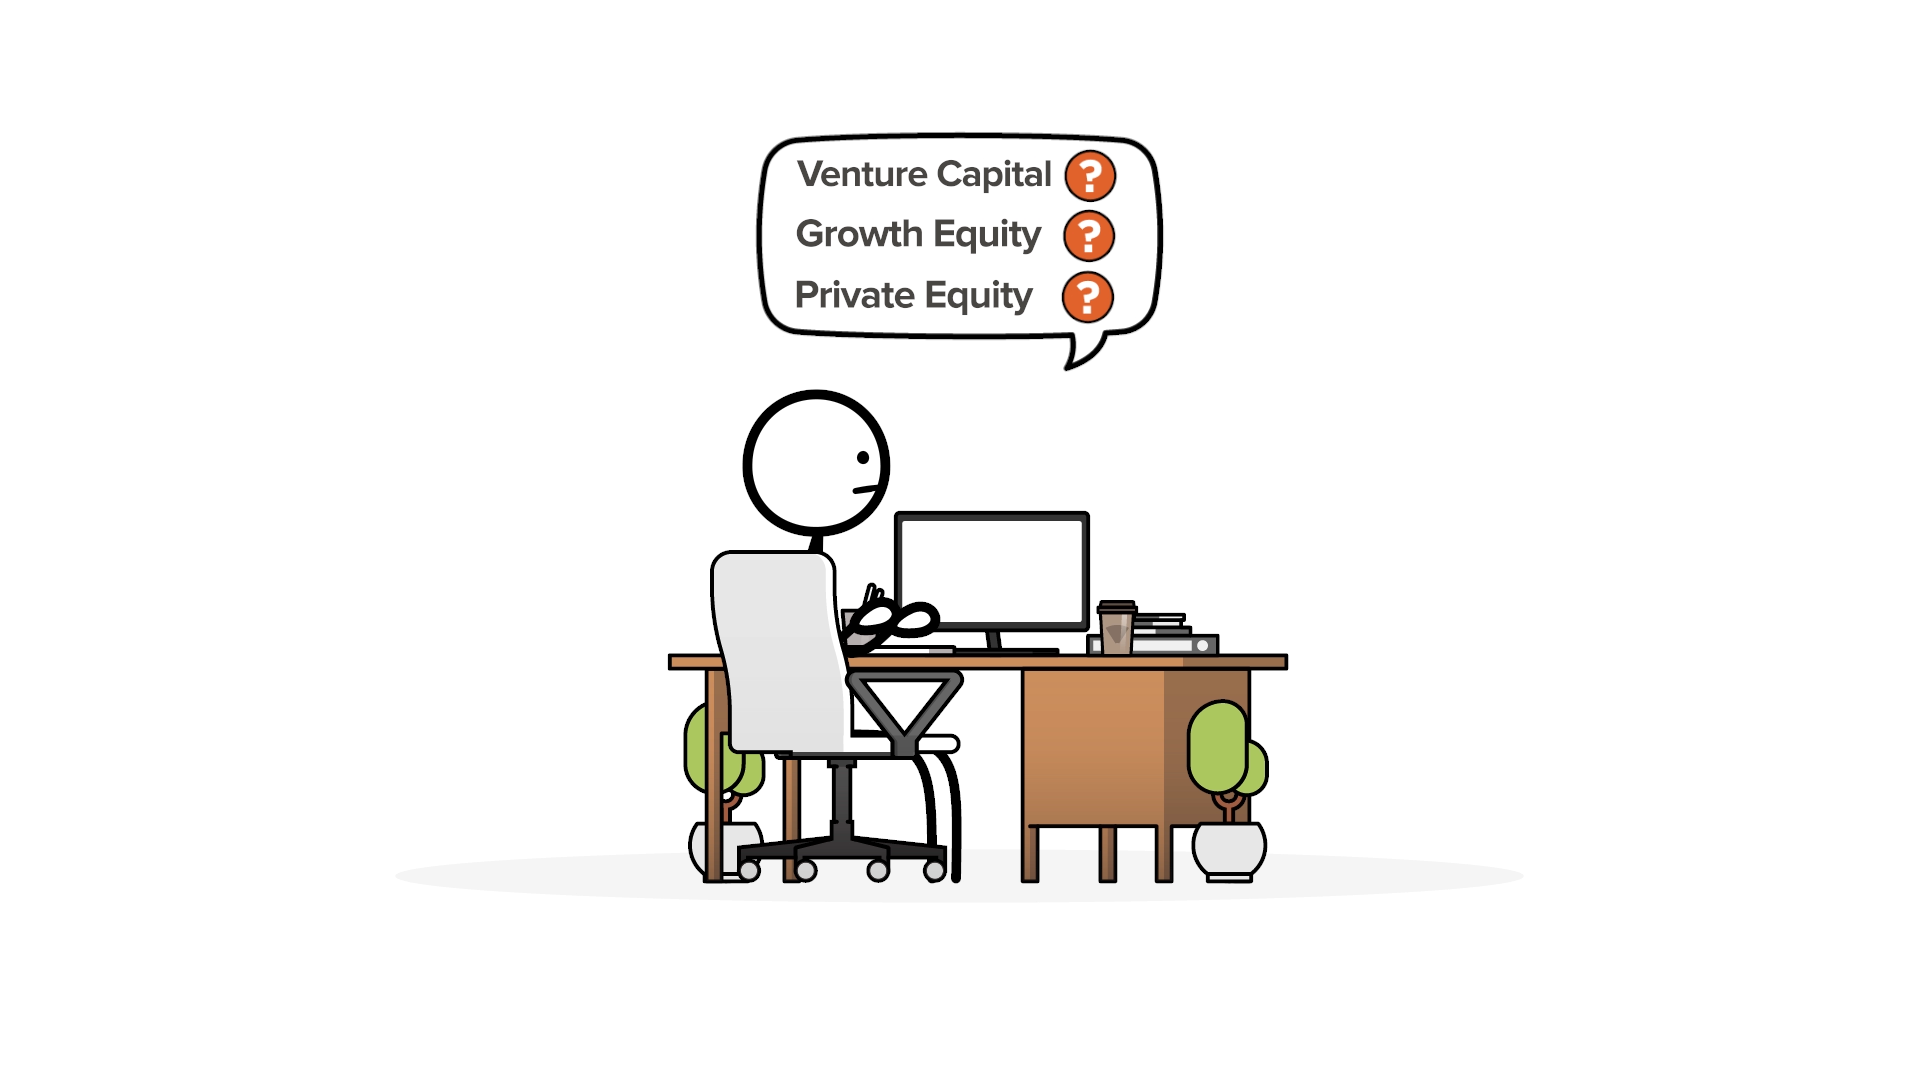 Stick figure trying to understand Private Equity vs Venture Capital and how Growth Equity fits in.